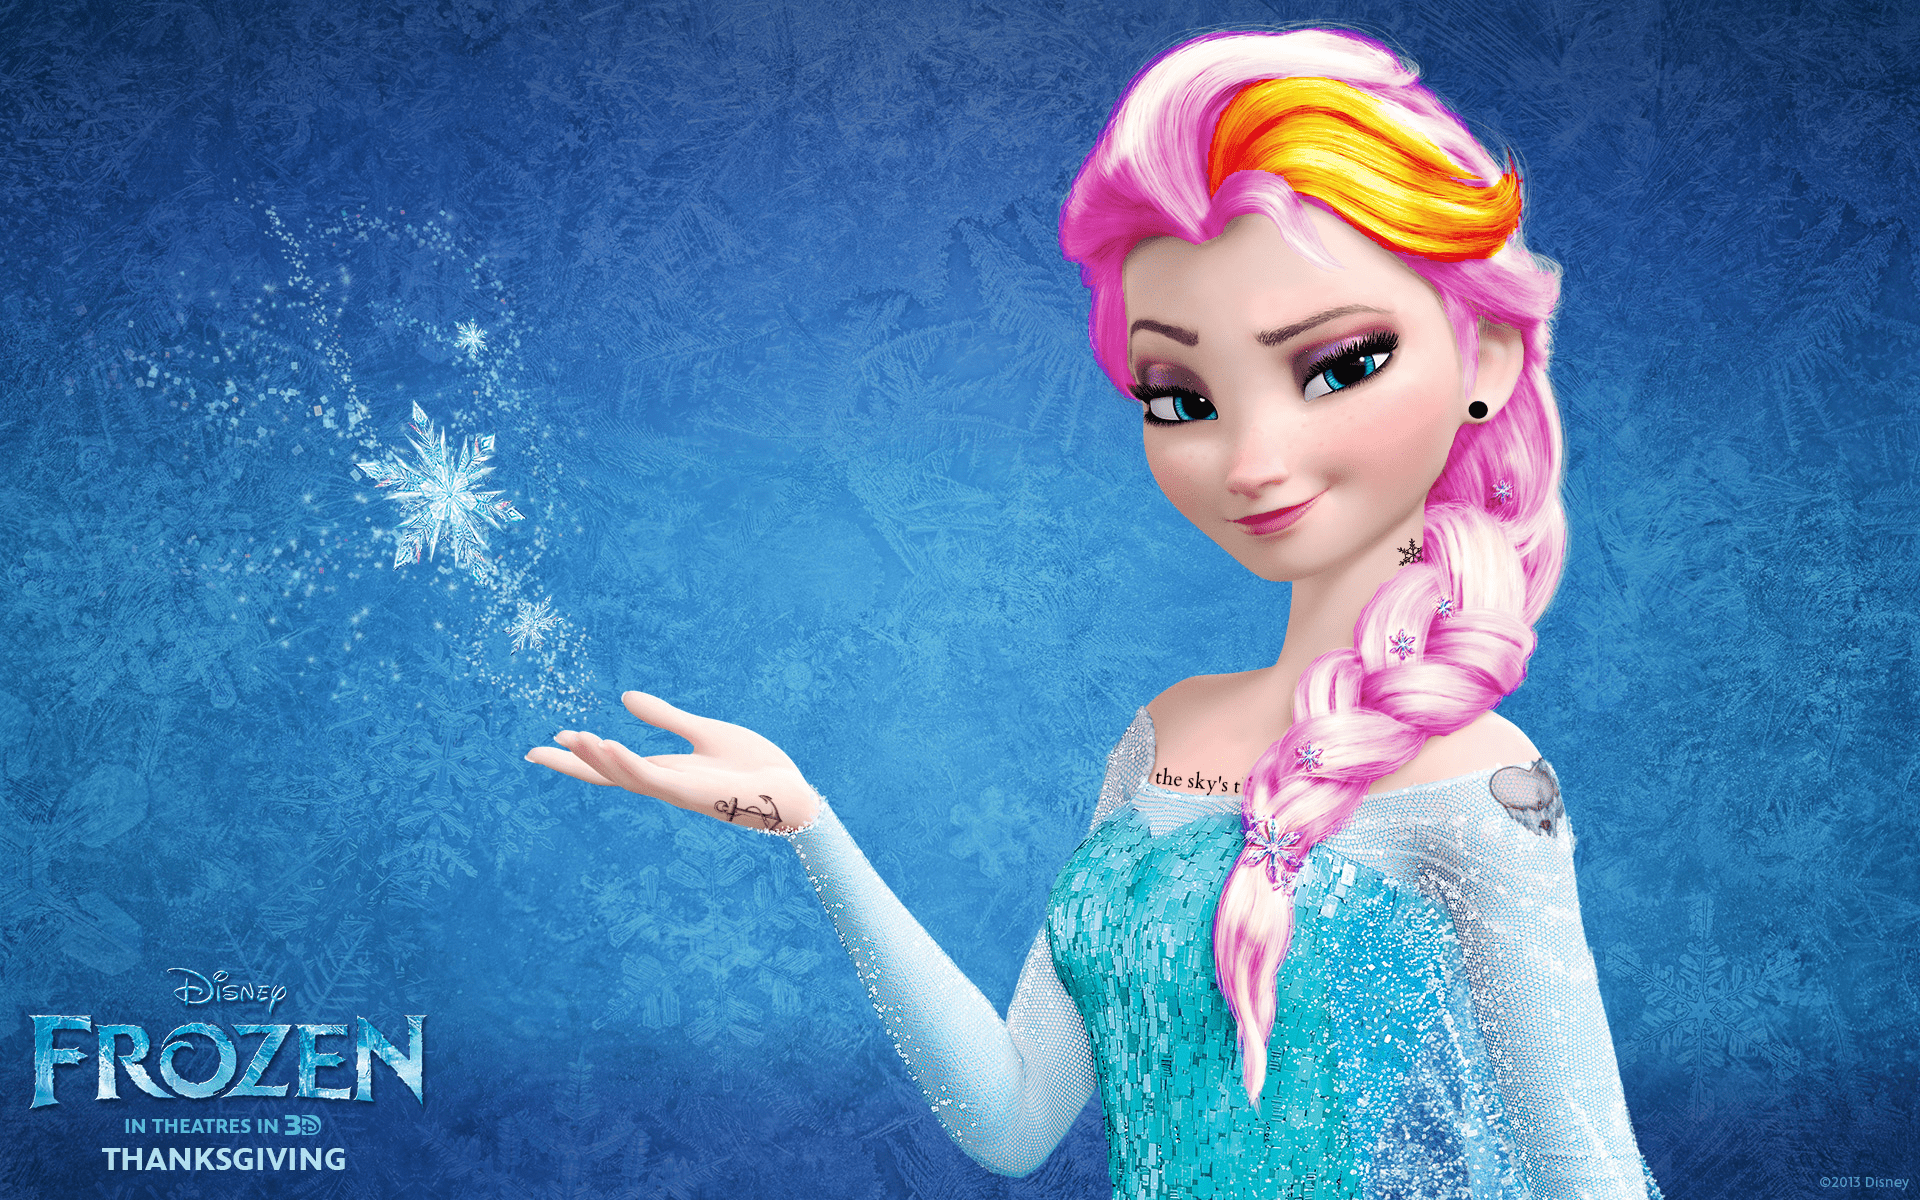 A frozen character is holding her hand up - Elsa